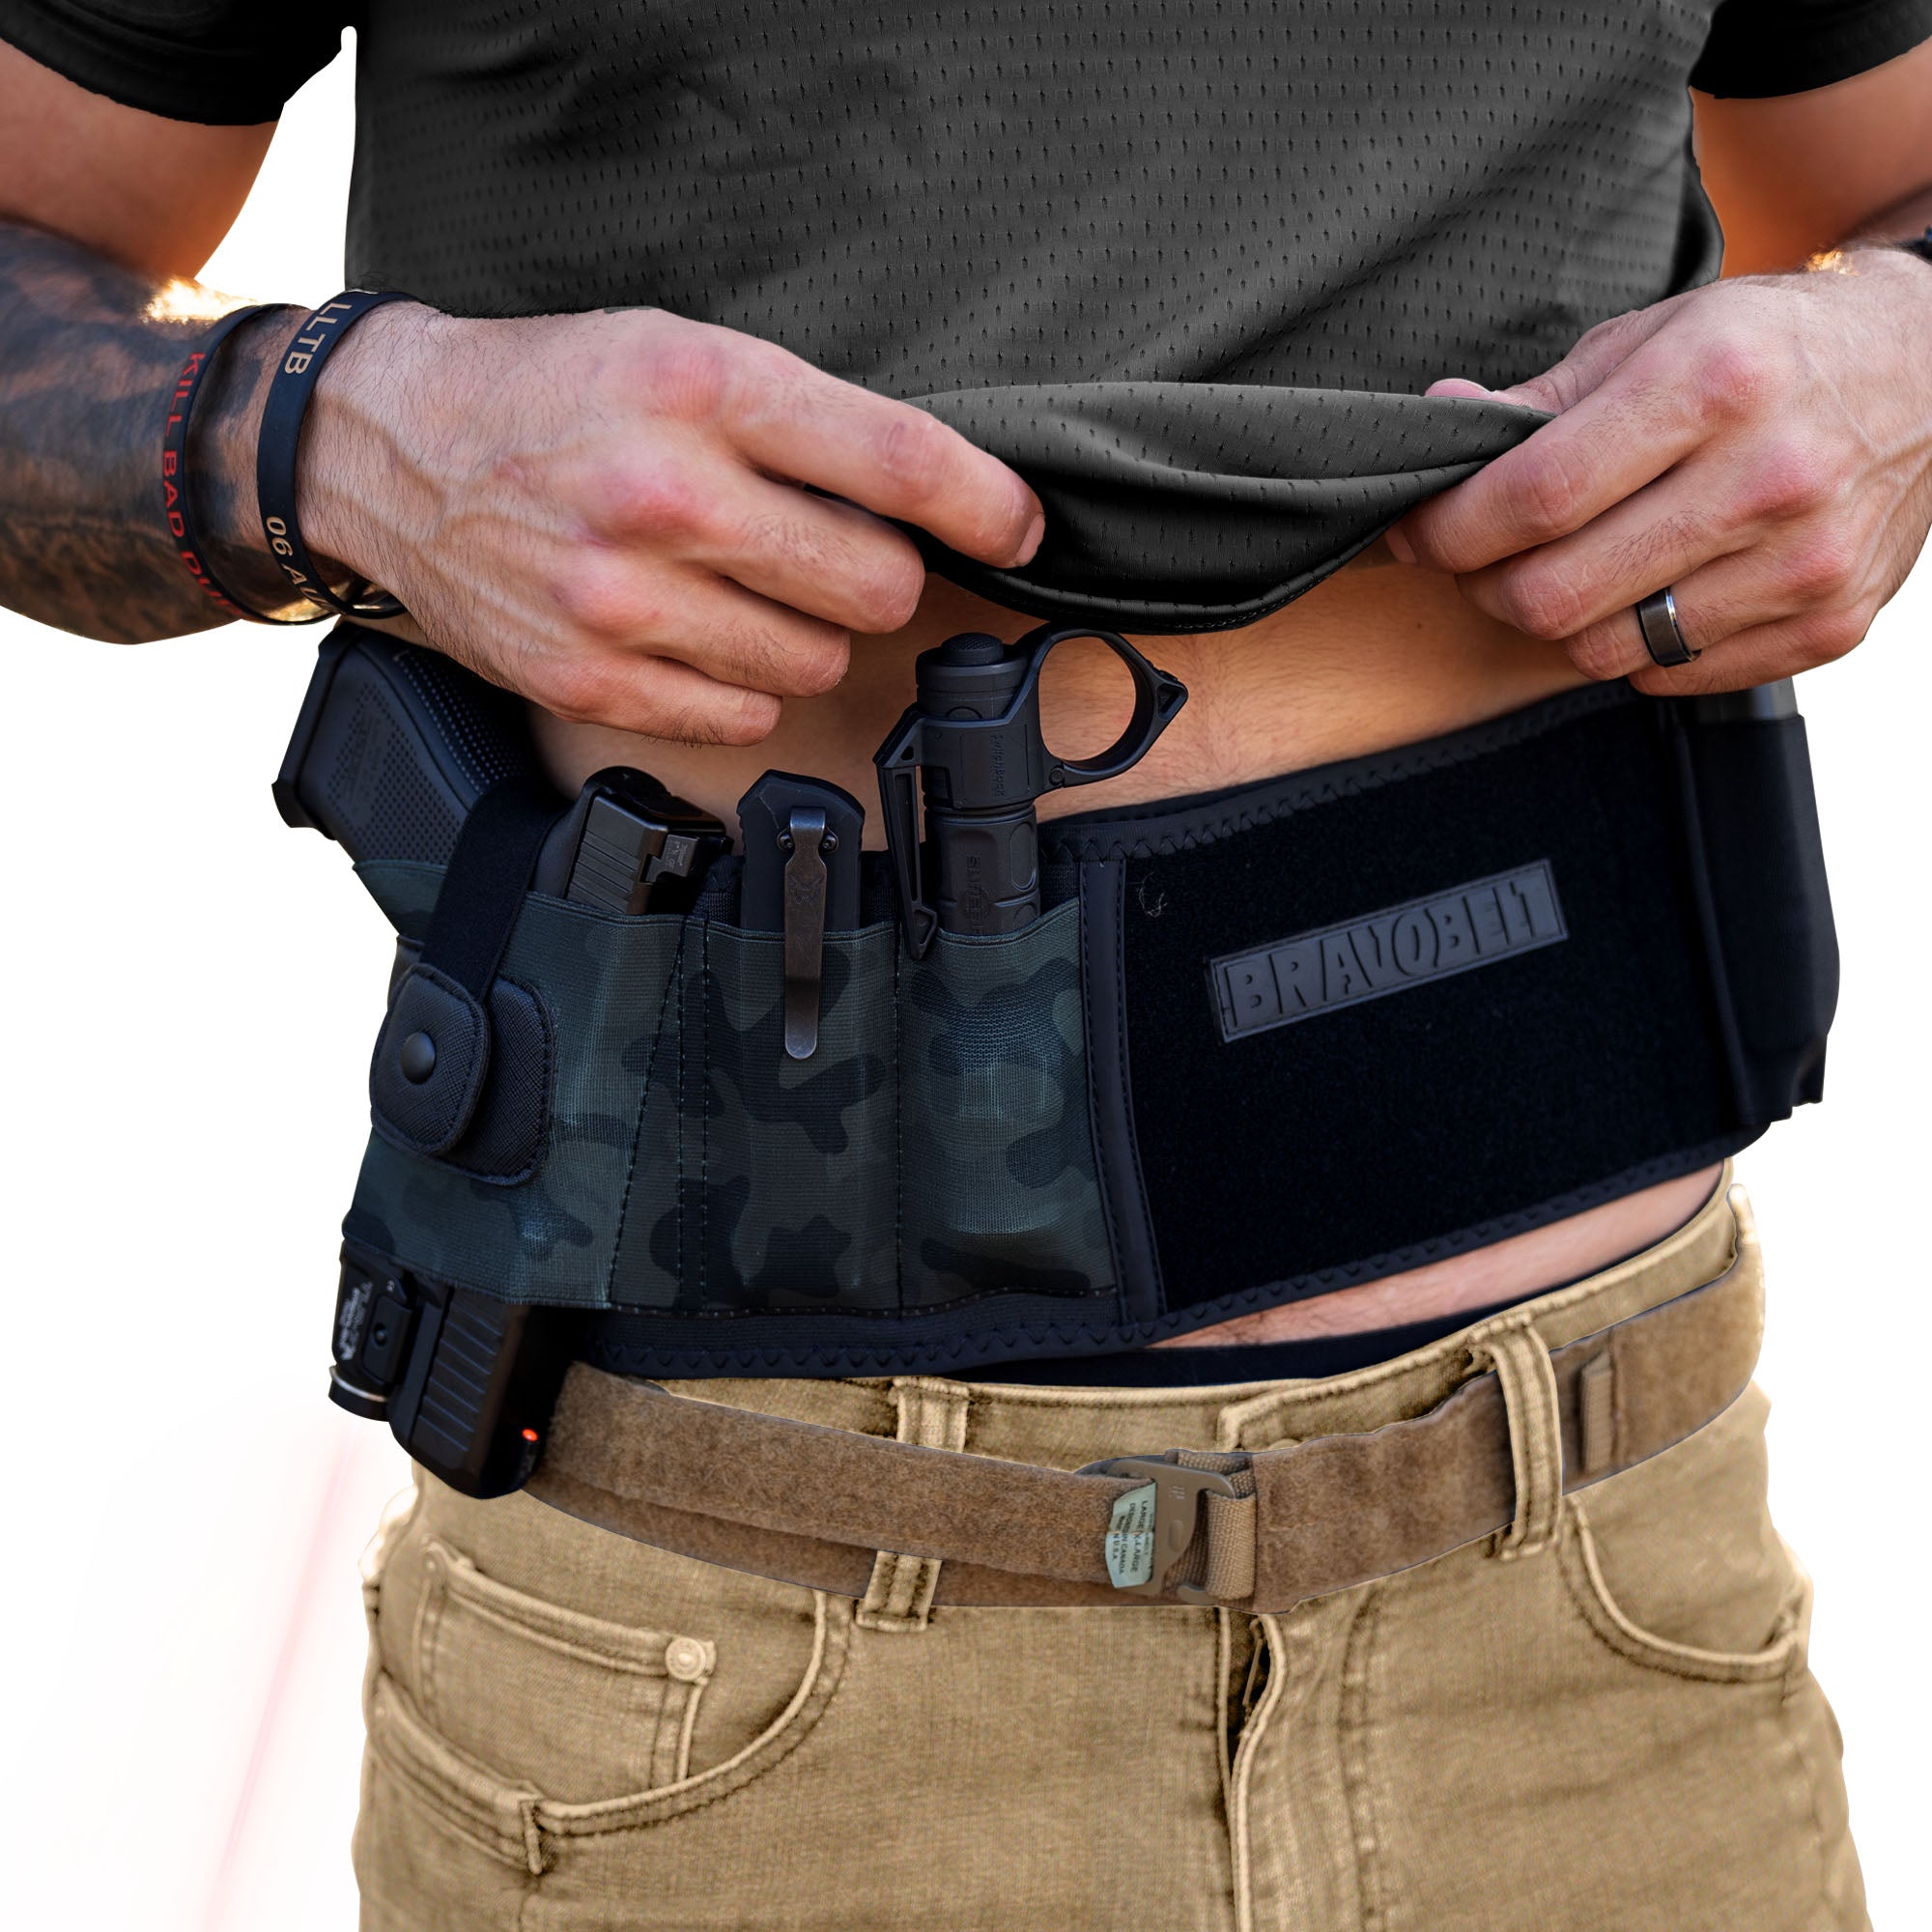 BravoBelt Laser Fit Edition - Belly Band Holster for Concealed Carry   Compatible with Red Dot, Lasers & Tactical TLR Light Systems -Unisex (Camo)